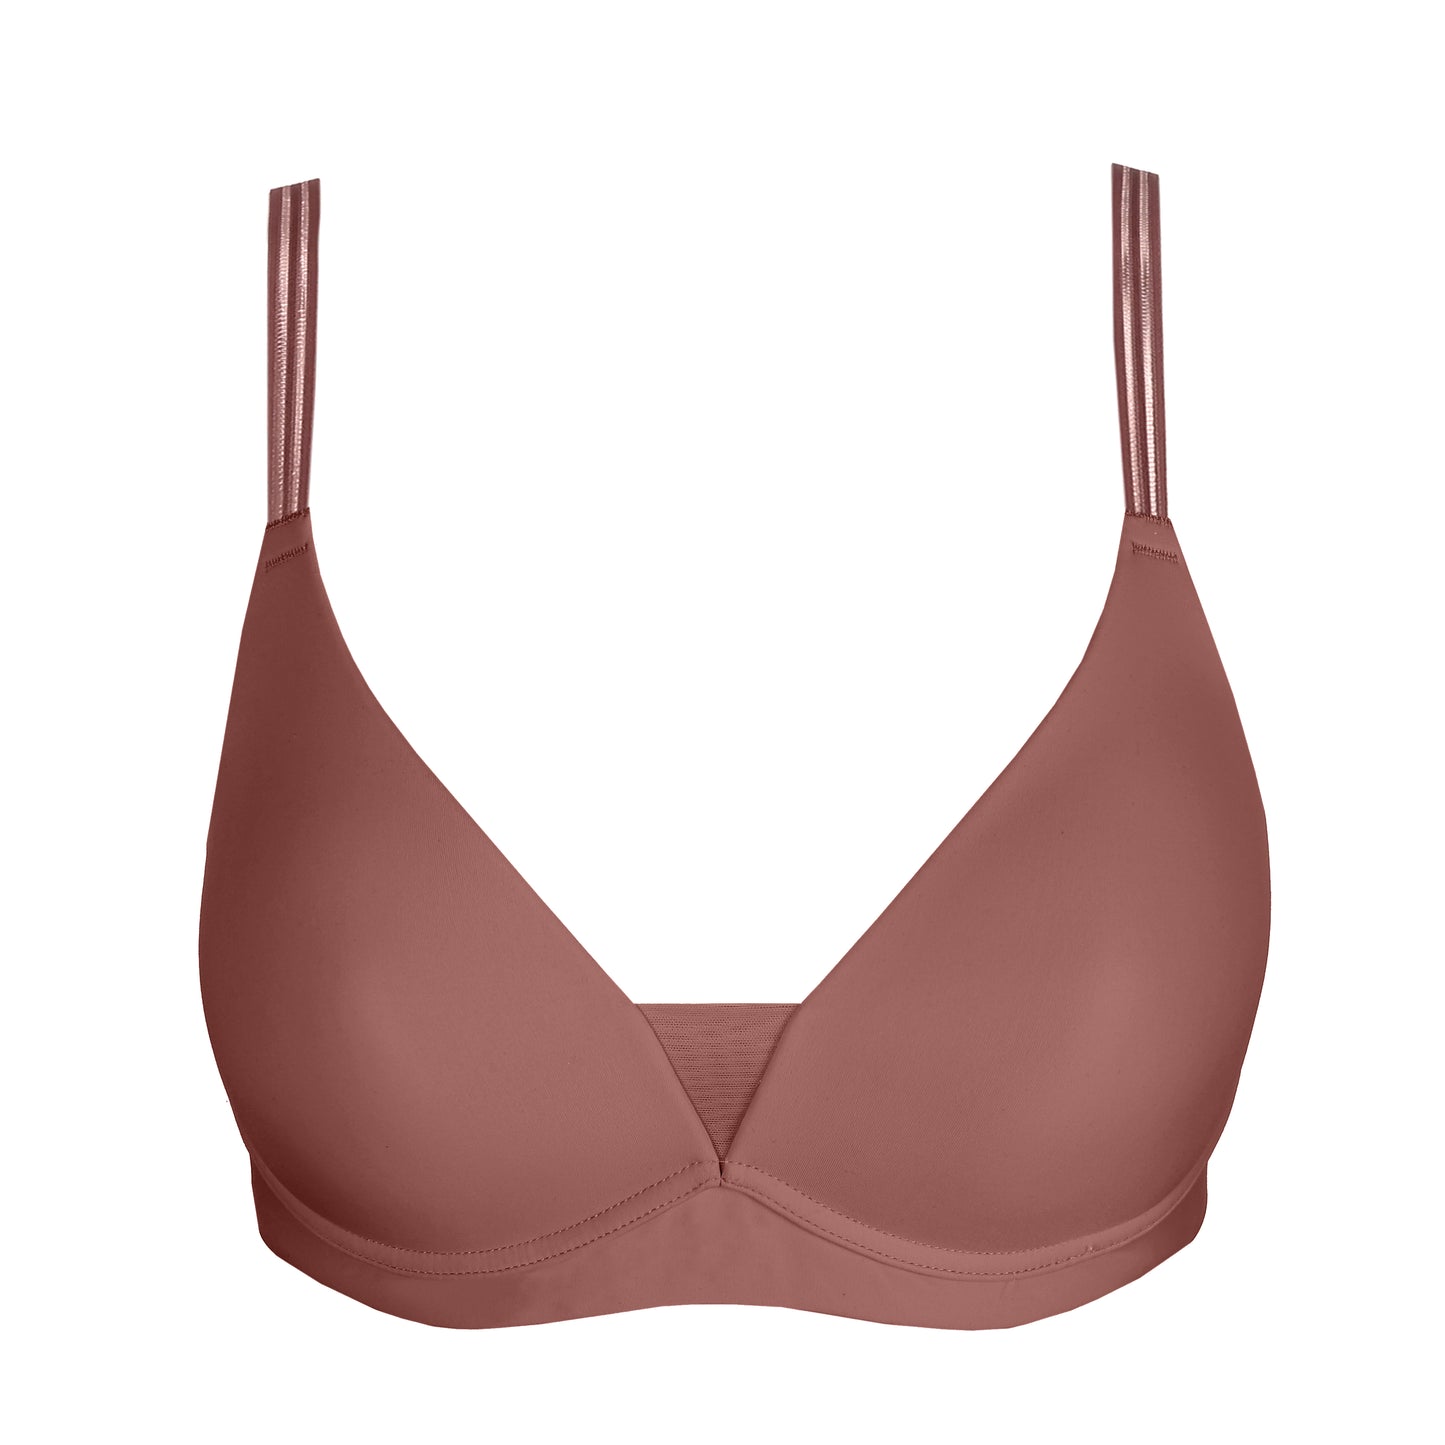 Marie Jo Louie volle cup bh zonder beugels satin taupe